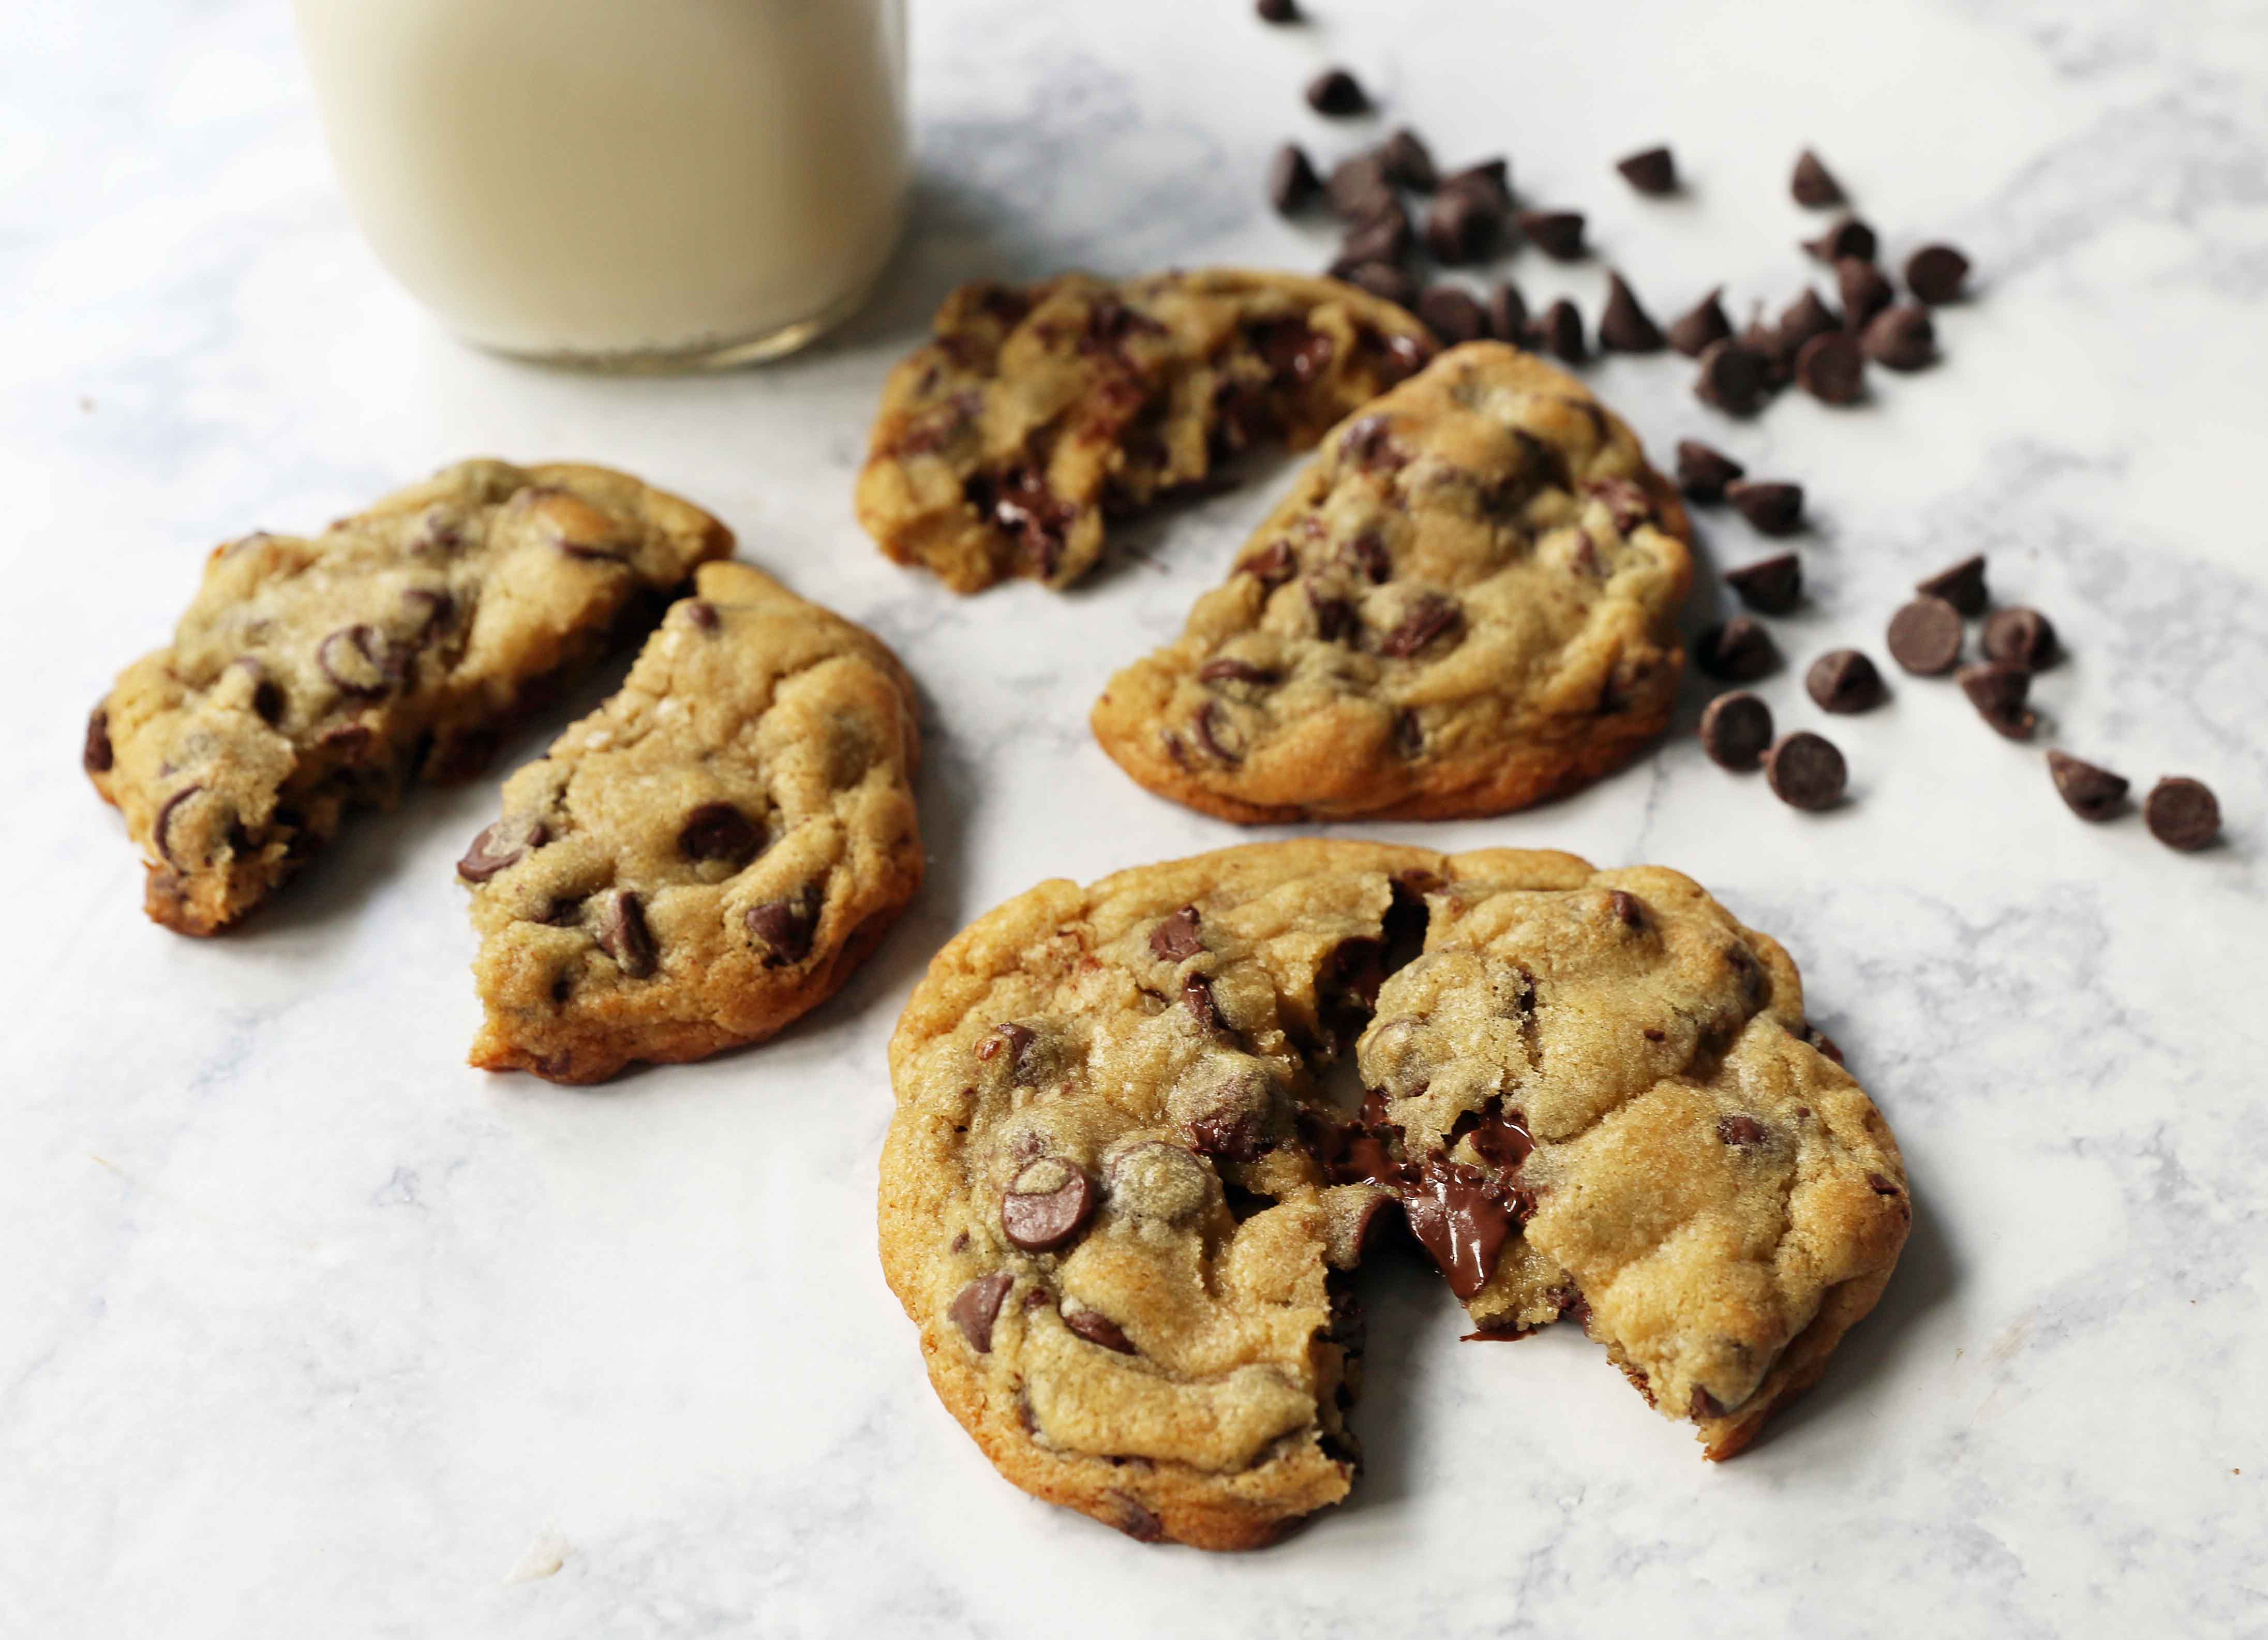 The BEST Chocolate Chip Cookie Recipe. How to make the best chocolate chip cookies in the world. These are hands down the most perfect chocolate chip cookies! Tips and tricks for making the best chocolate chip cookies. www.modernhoney.com #cookie #cookies #chocolatechipcookie #chocolatechipcookies #homemade #cookierecipe #bestchocolatechipcookies